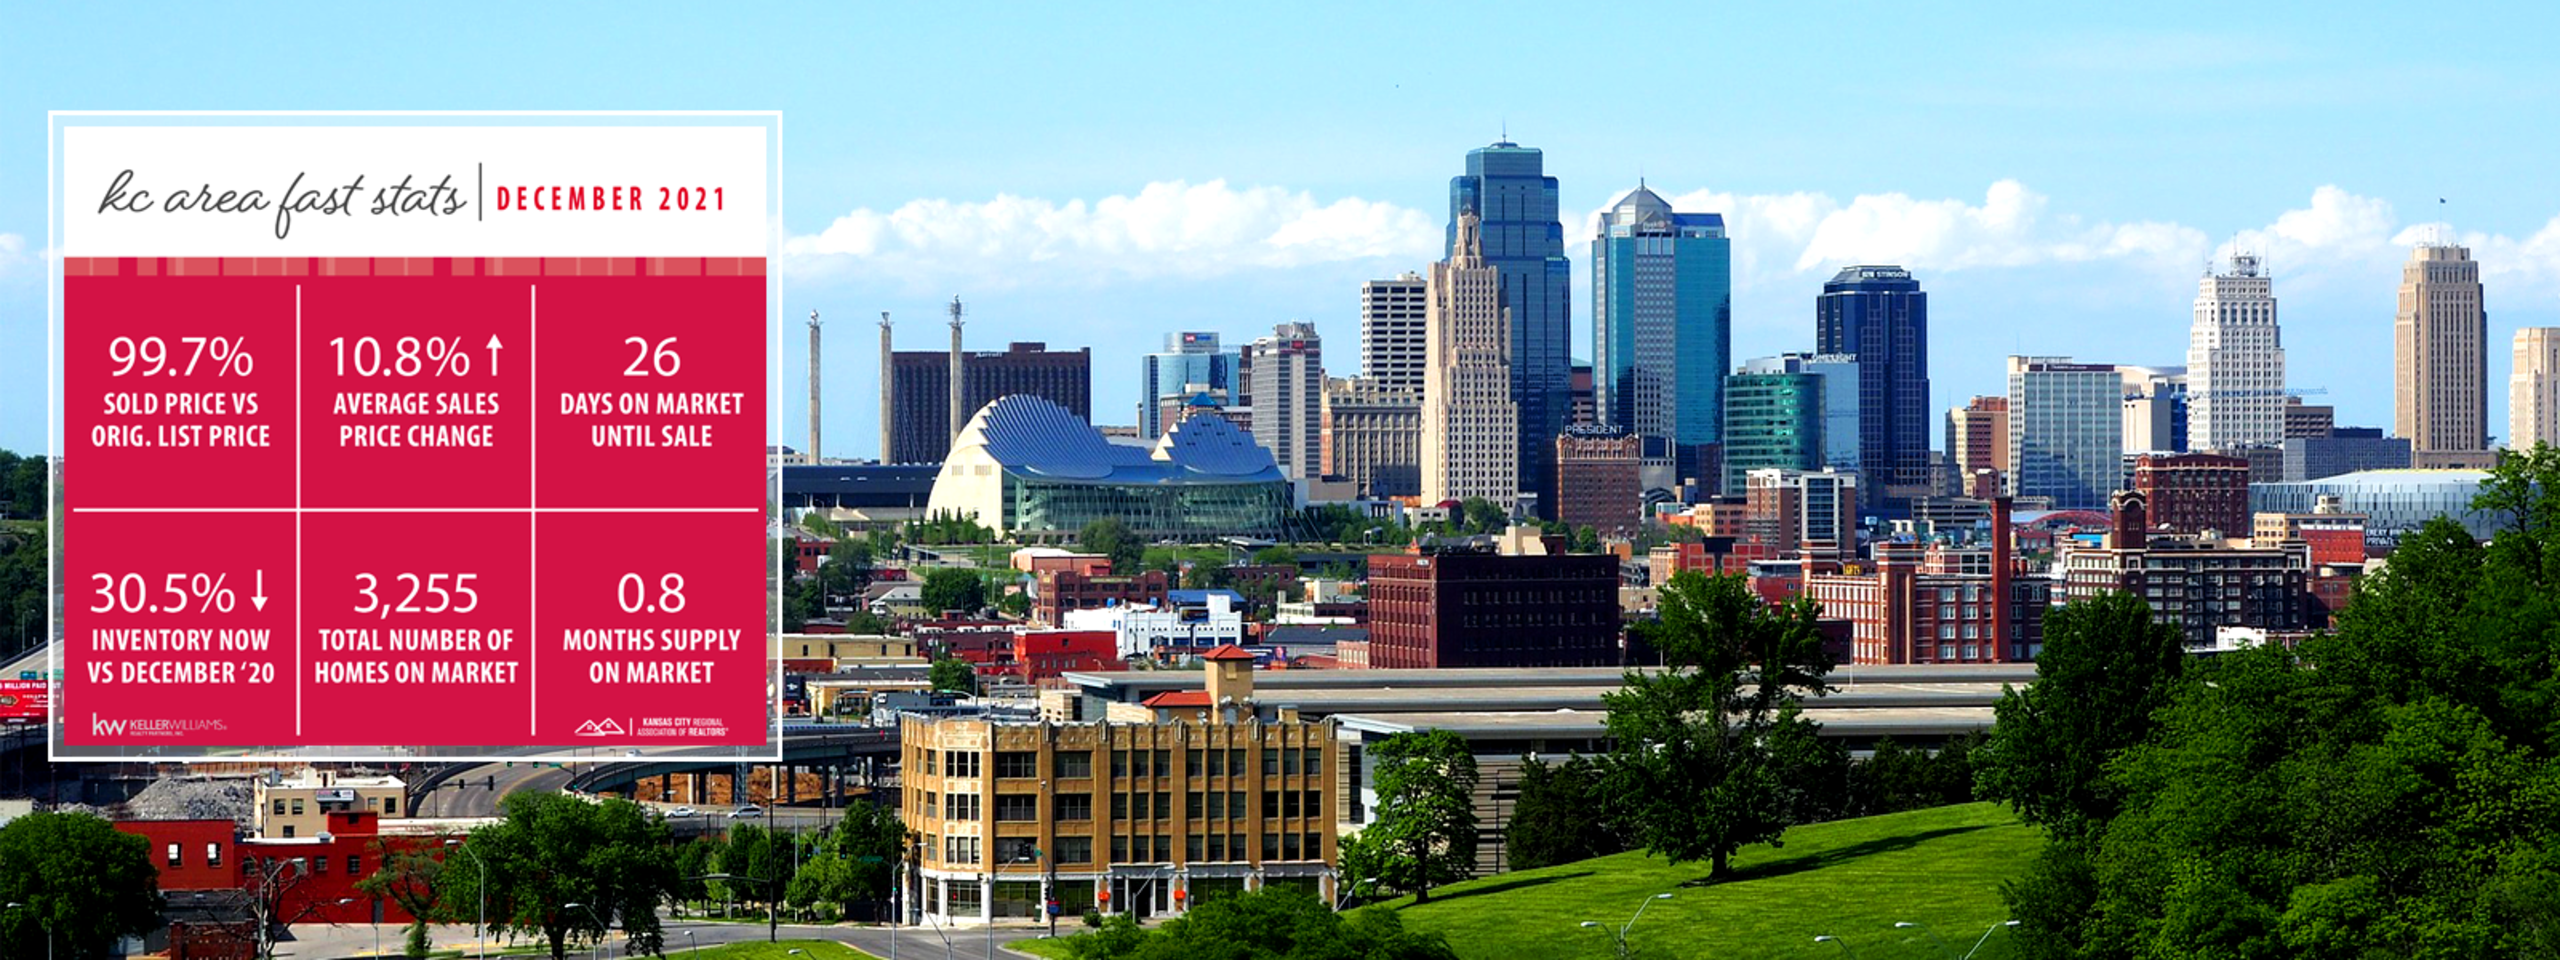 Visit our blog for KC area real estate & homeowner tips {{ CLICK HERE }}